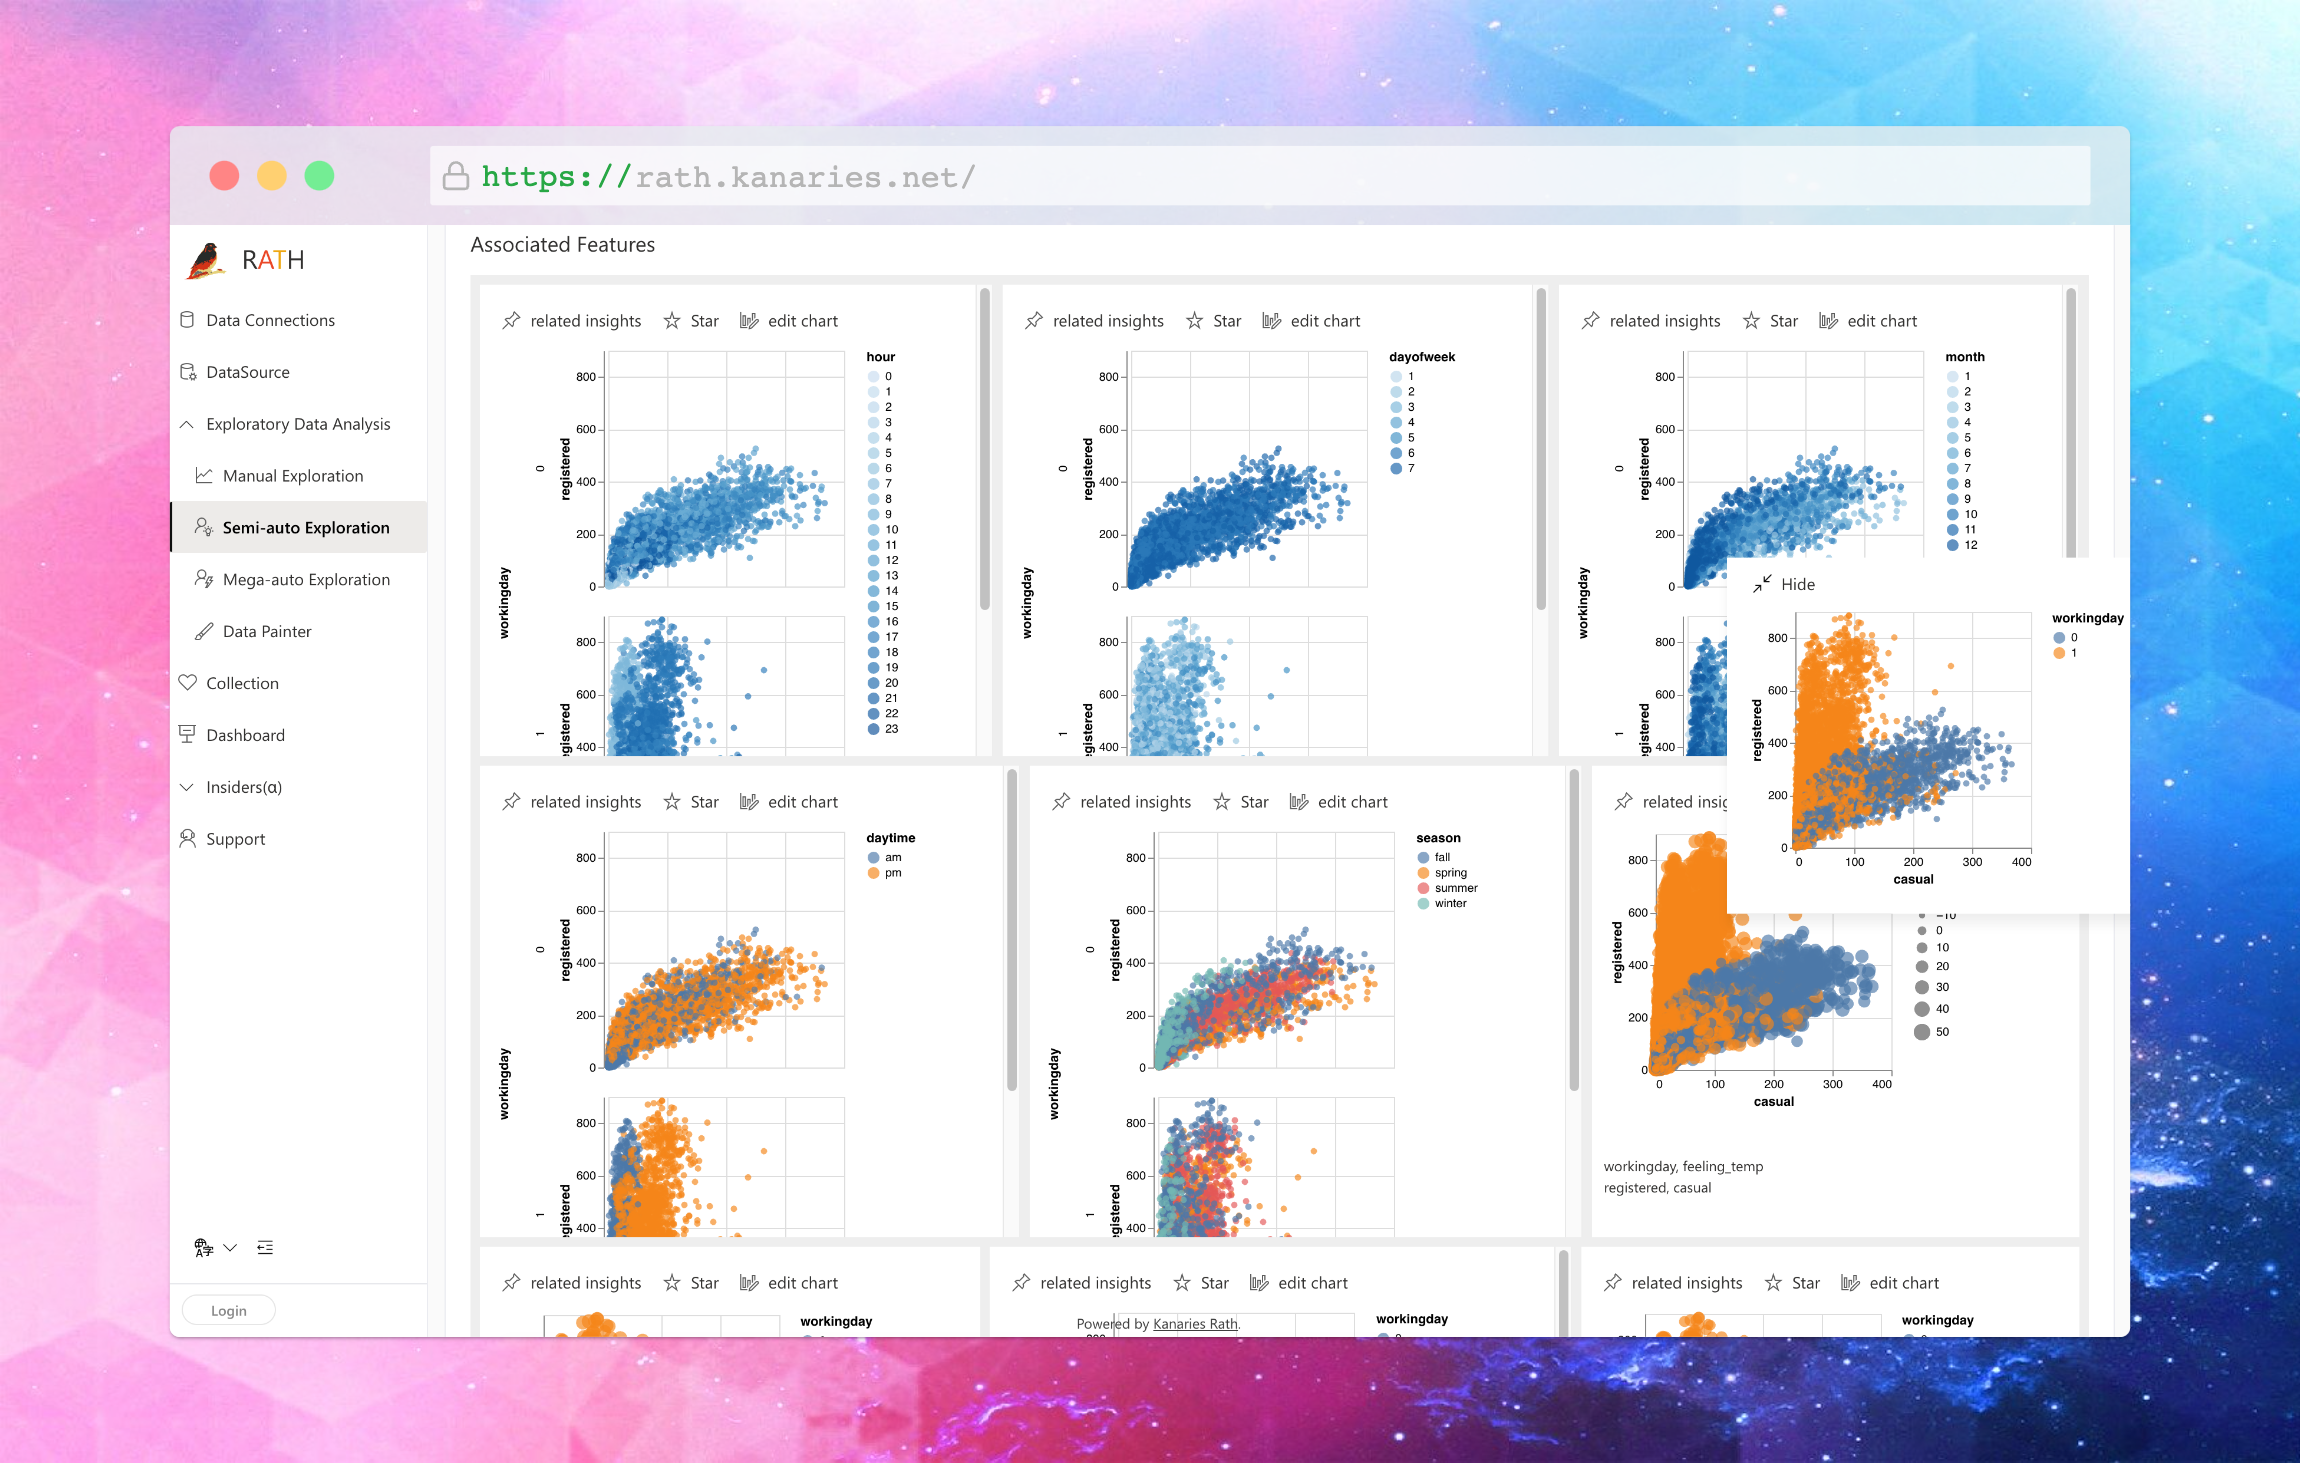 RATH: Copilot for Automated Data Analytics and Data Visualization